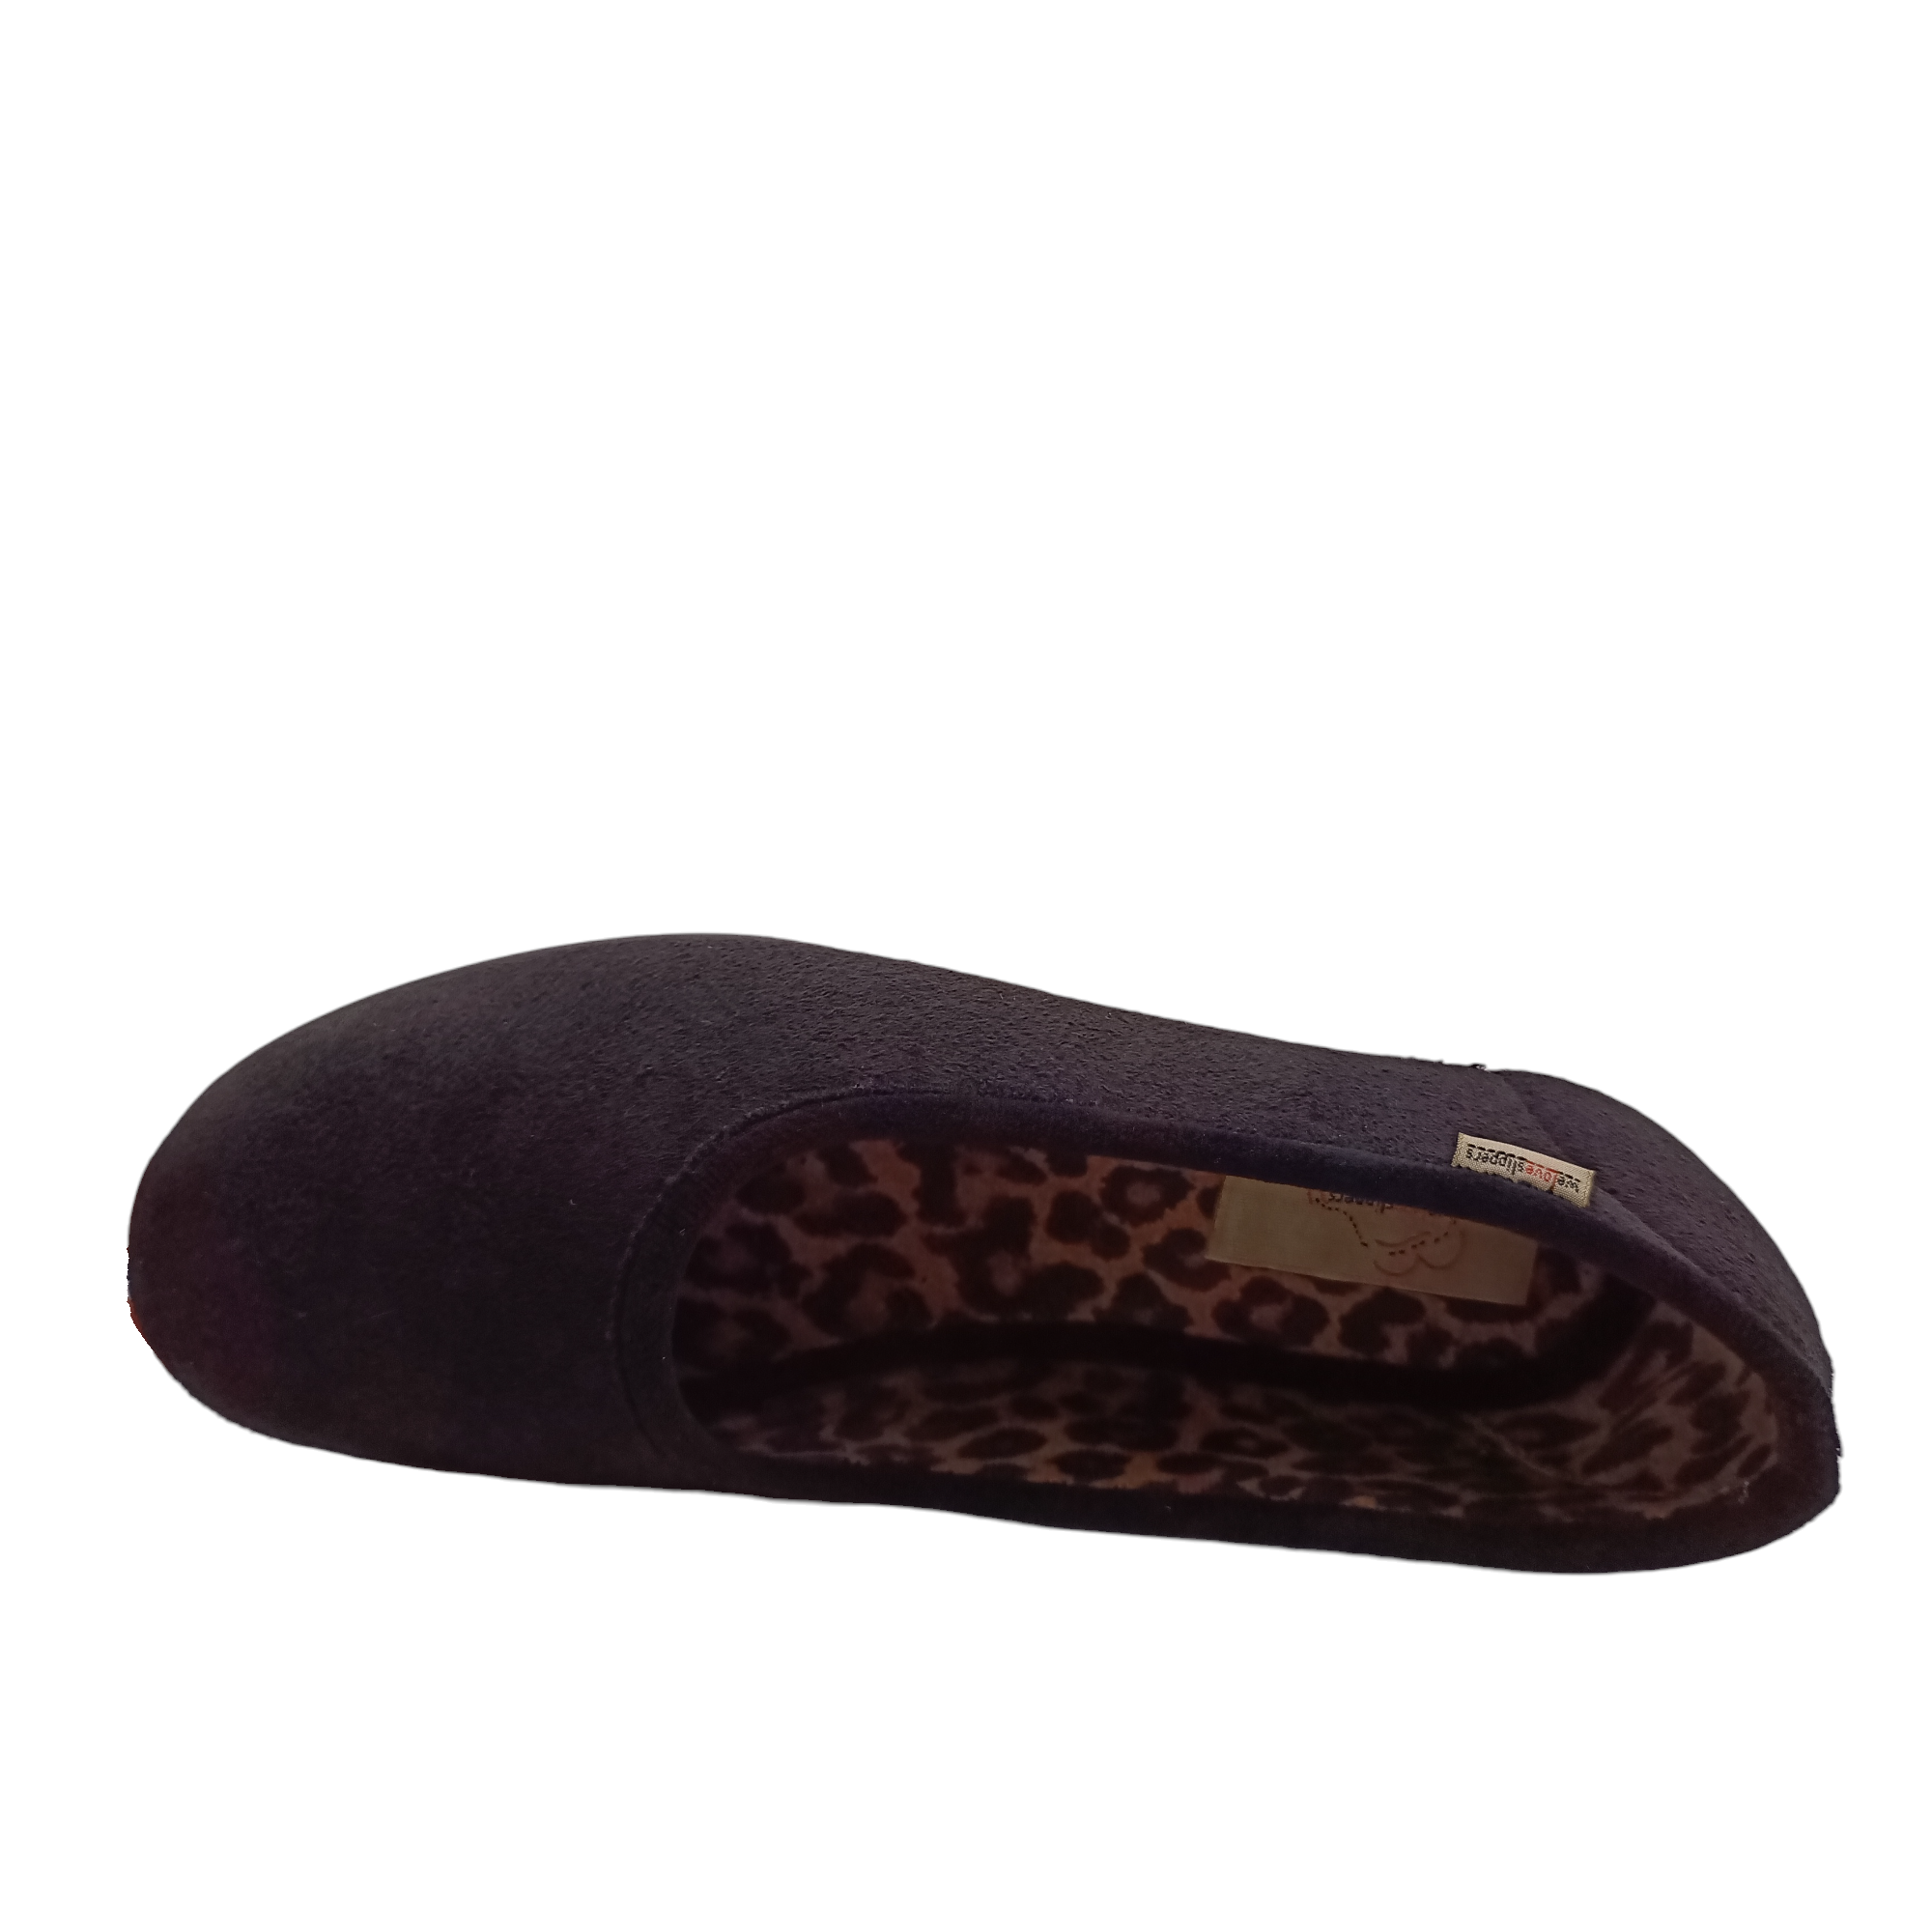 Top view of black Nuzzle Slippers with leopard print lining. Shop Womens Slippers and Shoes Online and In-store with shoe&me.